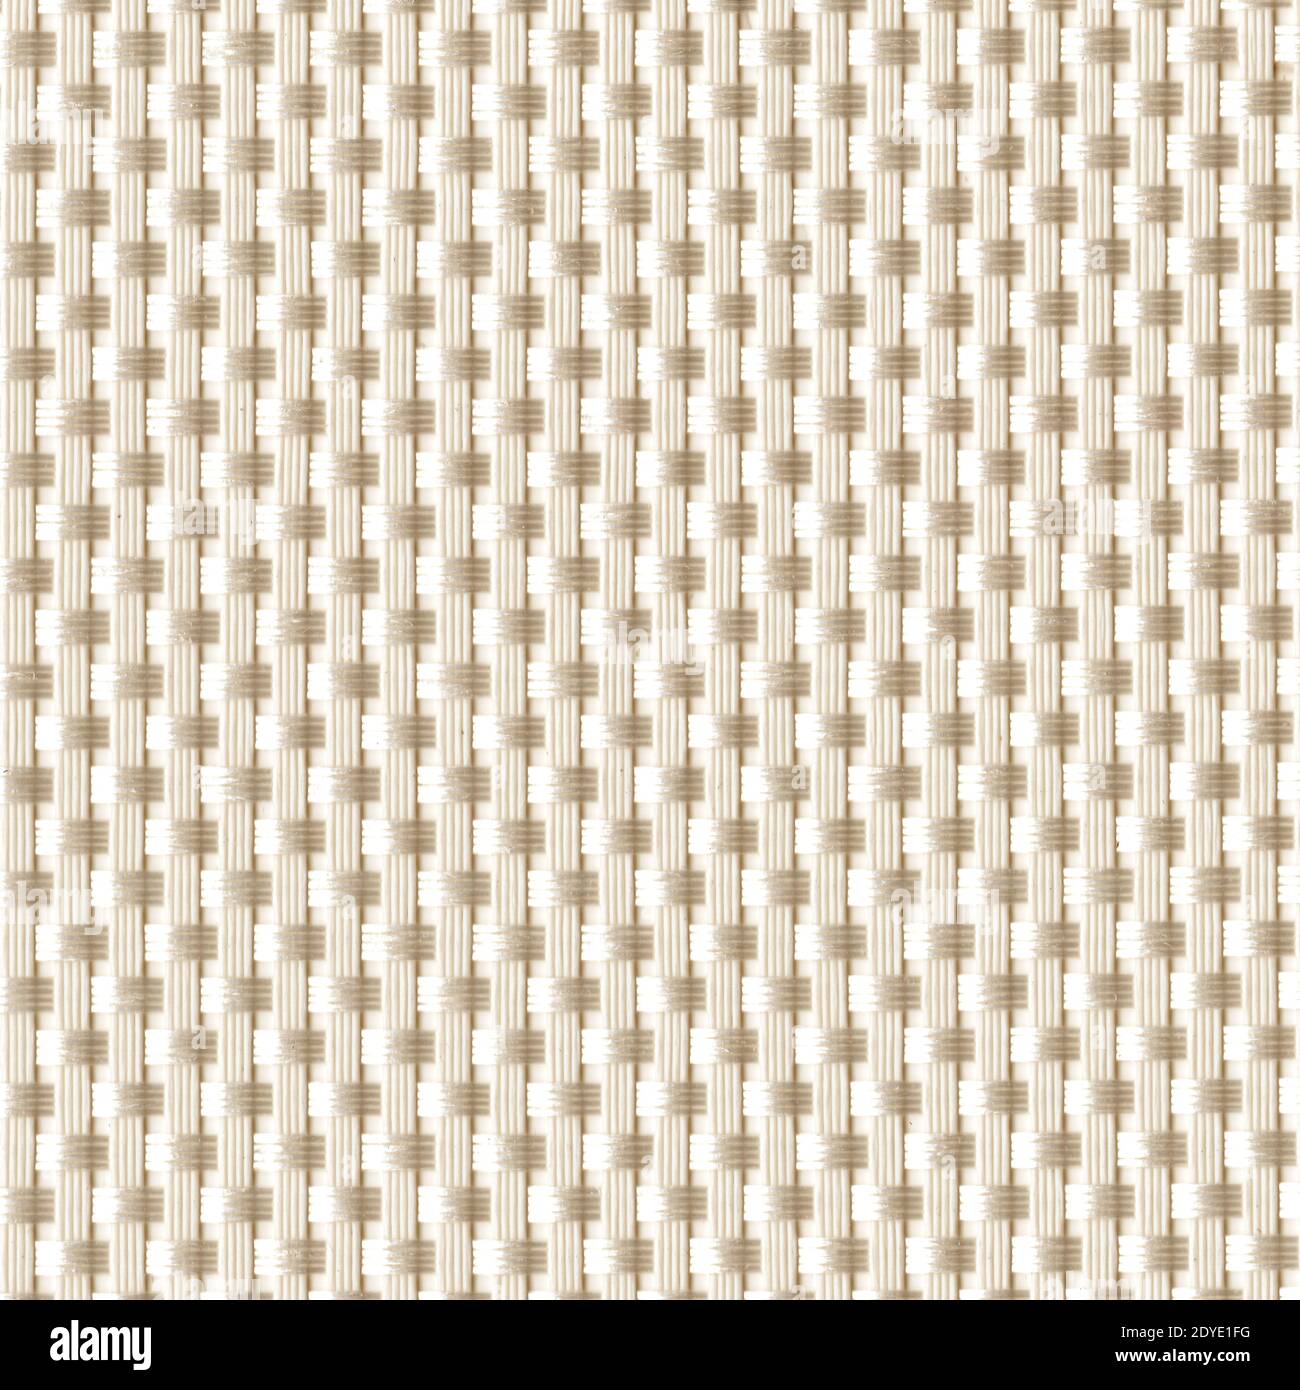 Knitted Fabric Texture. Textile texture off melange background. Detailed warm yarn background.Natural woolen fabric, sweater fragment. Stock Photo